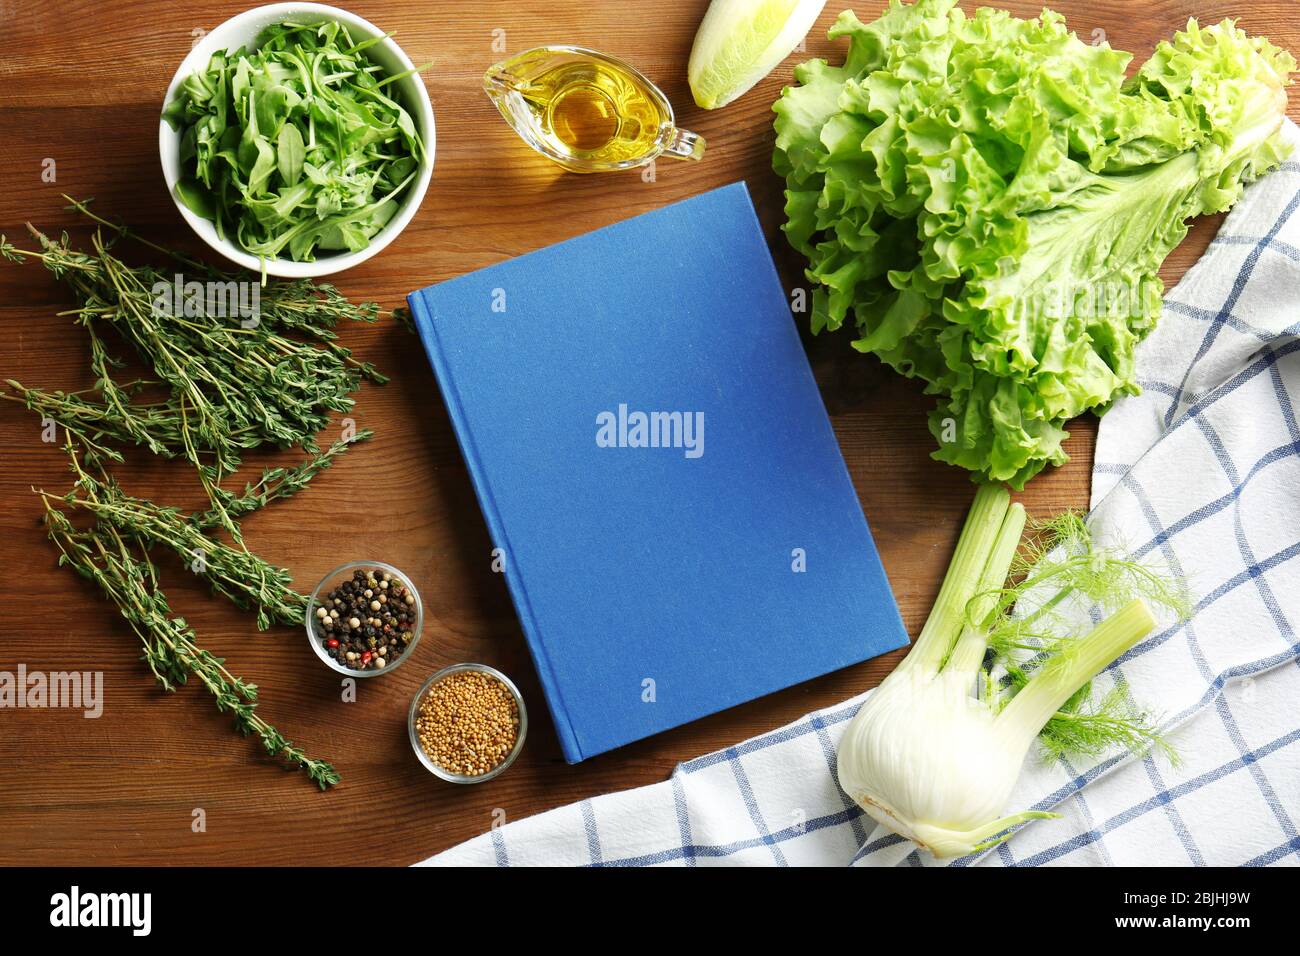 Notebook And Vegetables On Kitchen Table Cooking Classes Concept Stock Photo Alamy